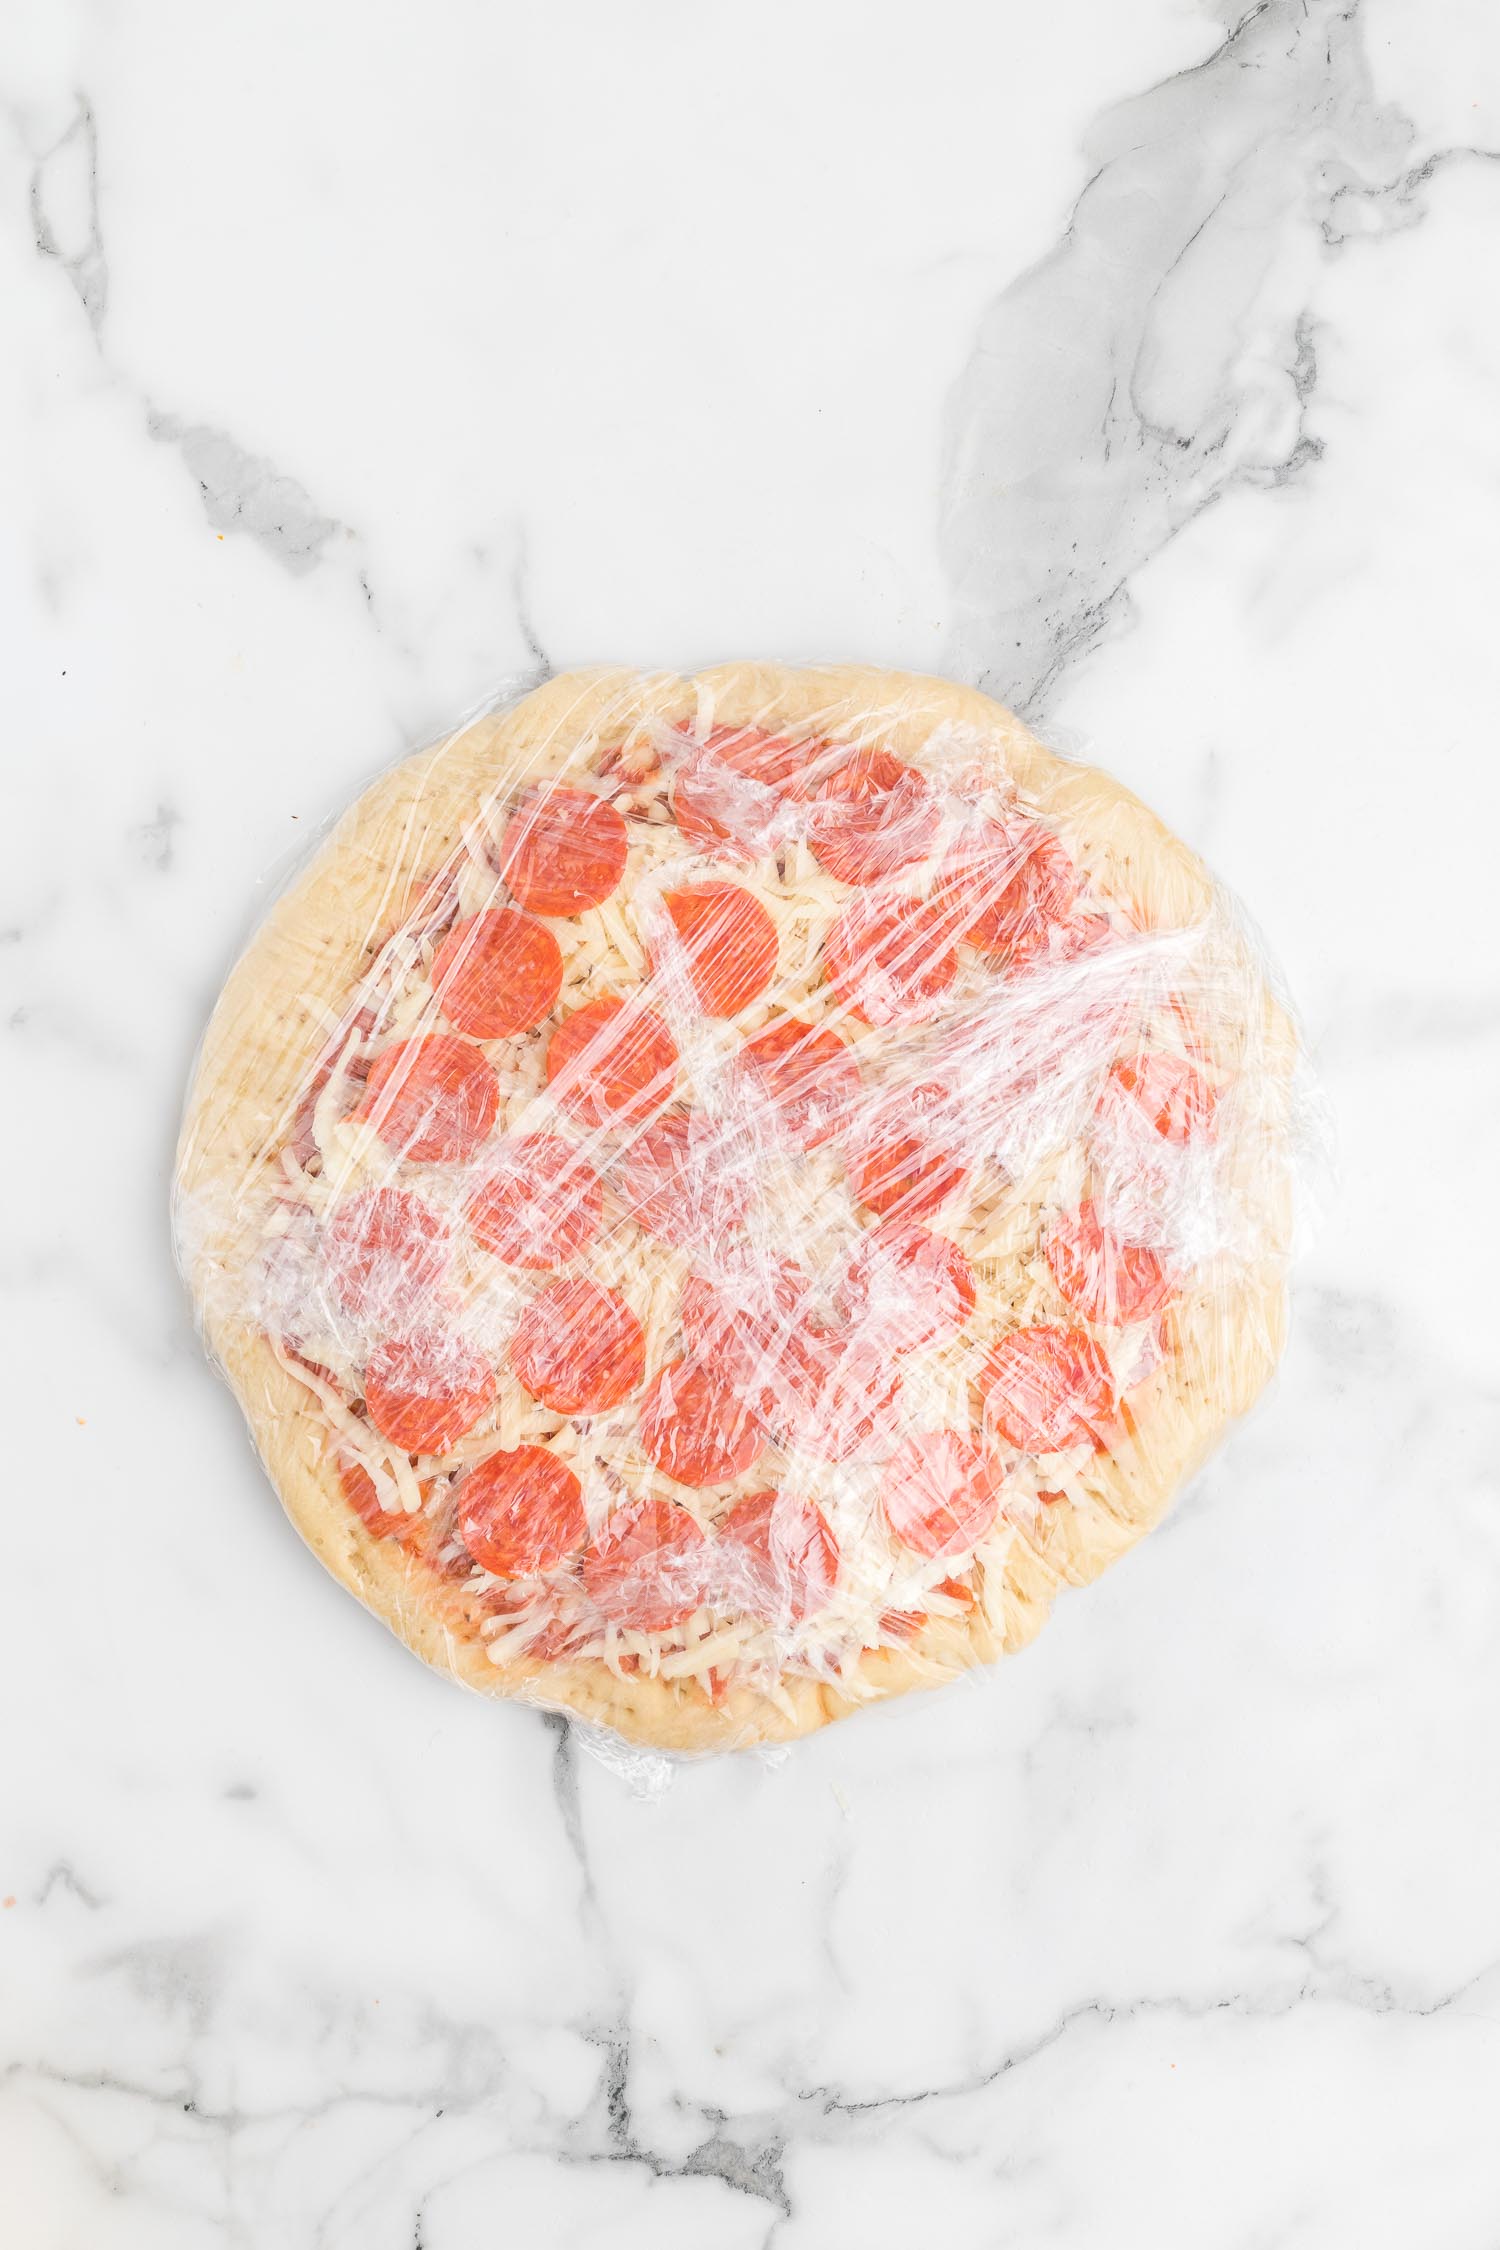 A whole freezer pizza wrapped in plastic wrap.